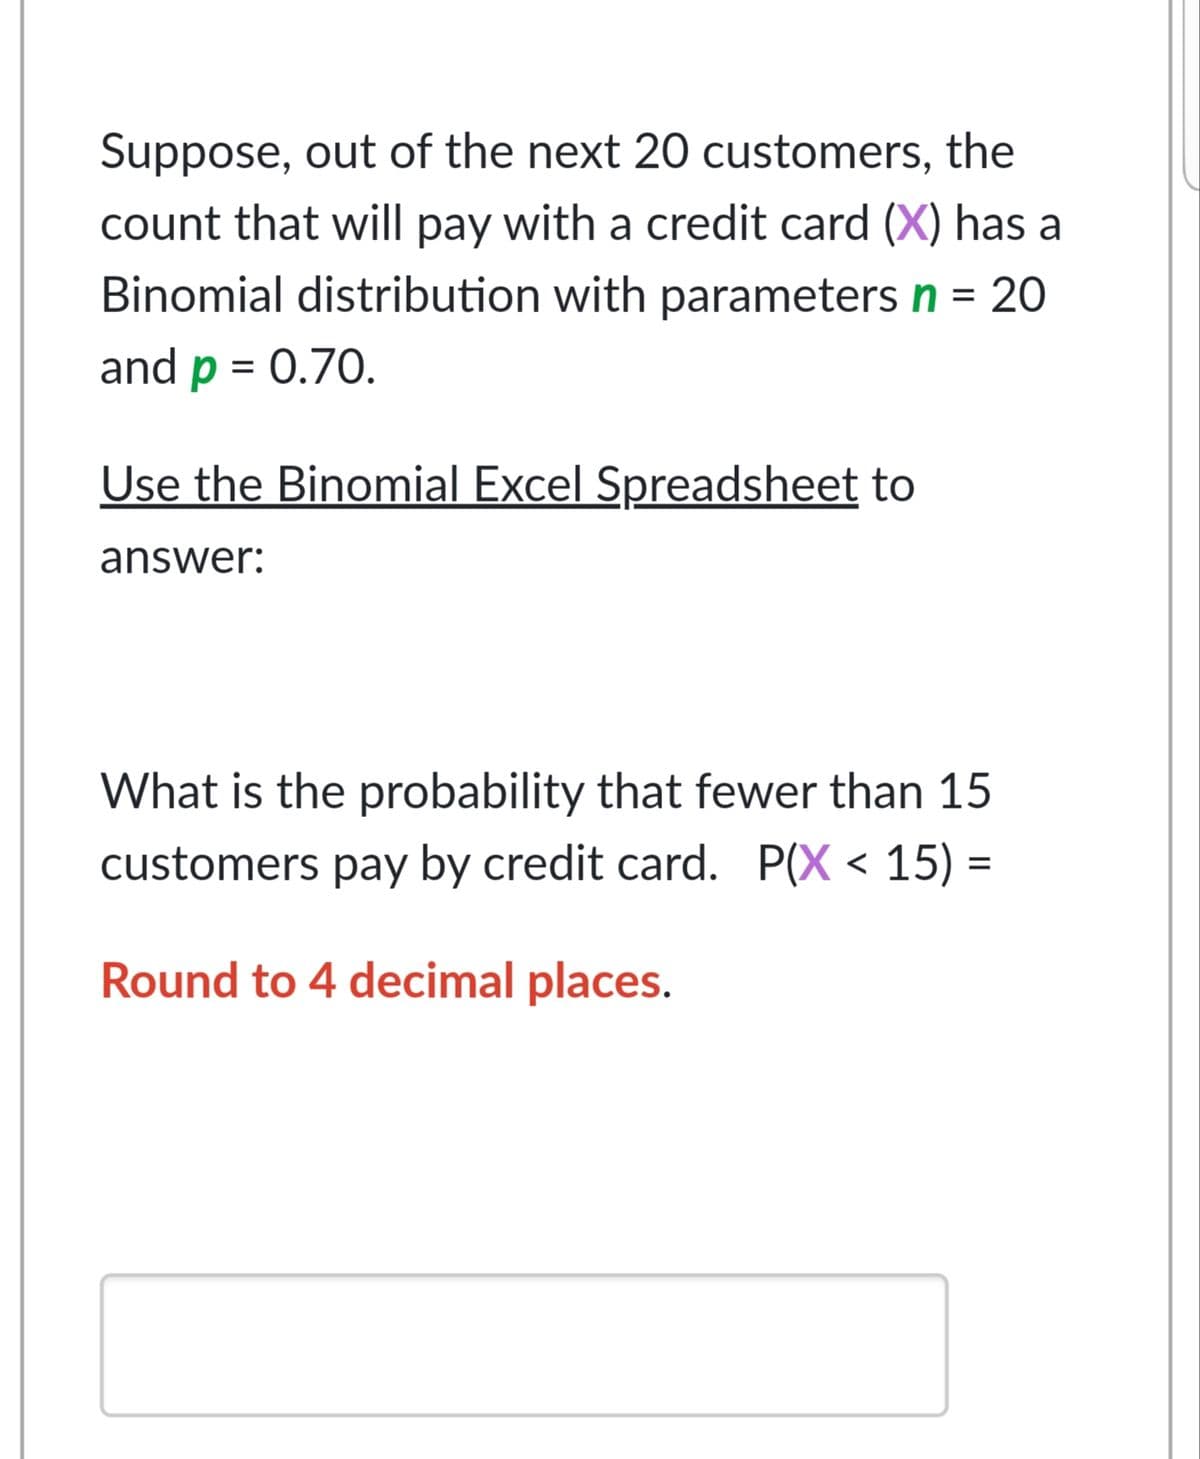 Suppose, out of the next 20 customers, the
count that will pay with a credit card (X) has a
Binomial distribution with parameters n = 20
and p = 0.70.
Use the Binomial Excel Spreadsheet to
answer:
What is the probability that fewer than 15
customers pay by credit card. P(X < 15) =
Round to 4 decimal places.
